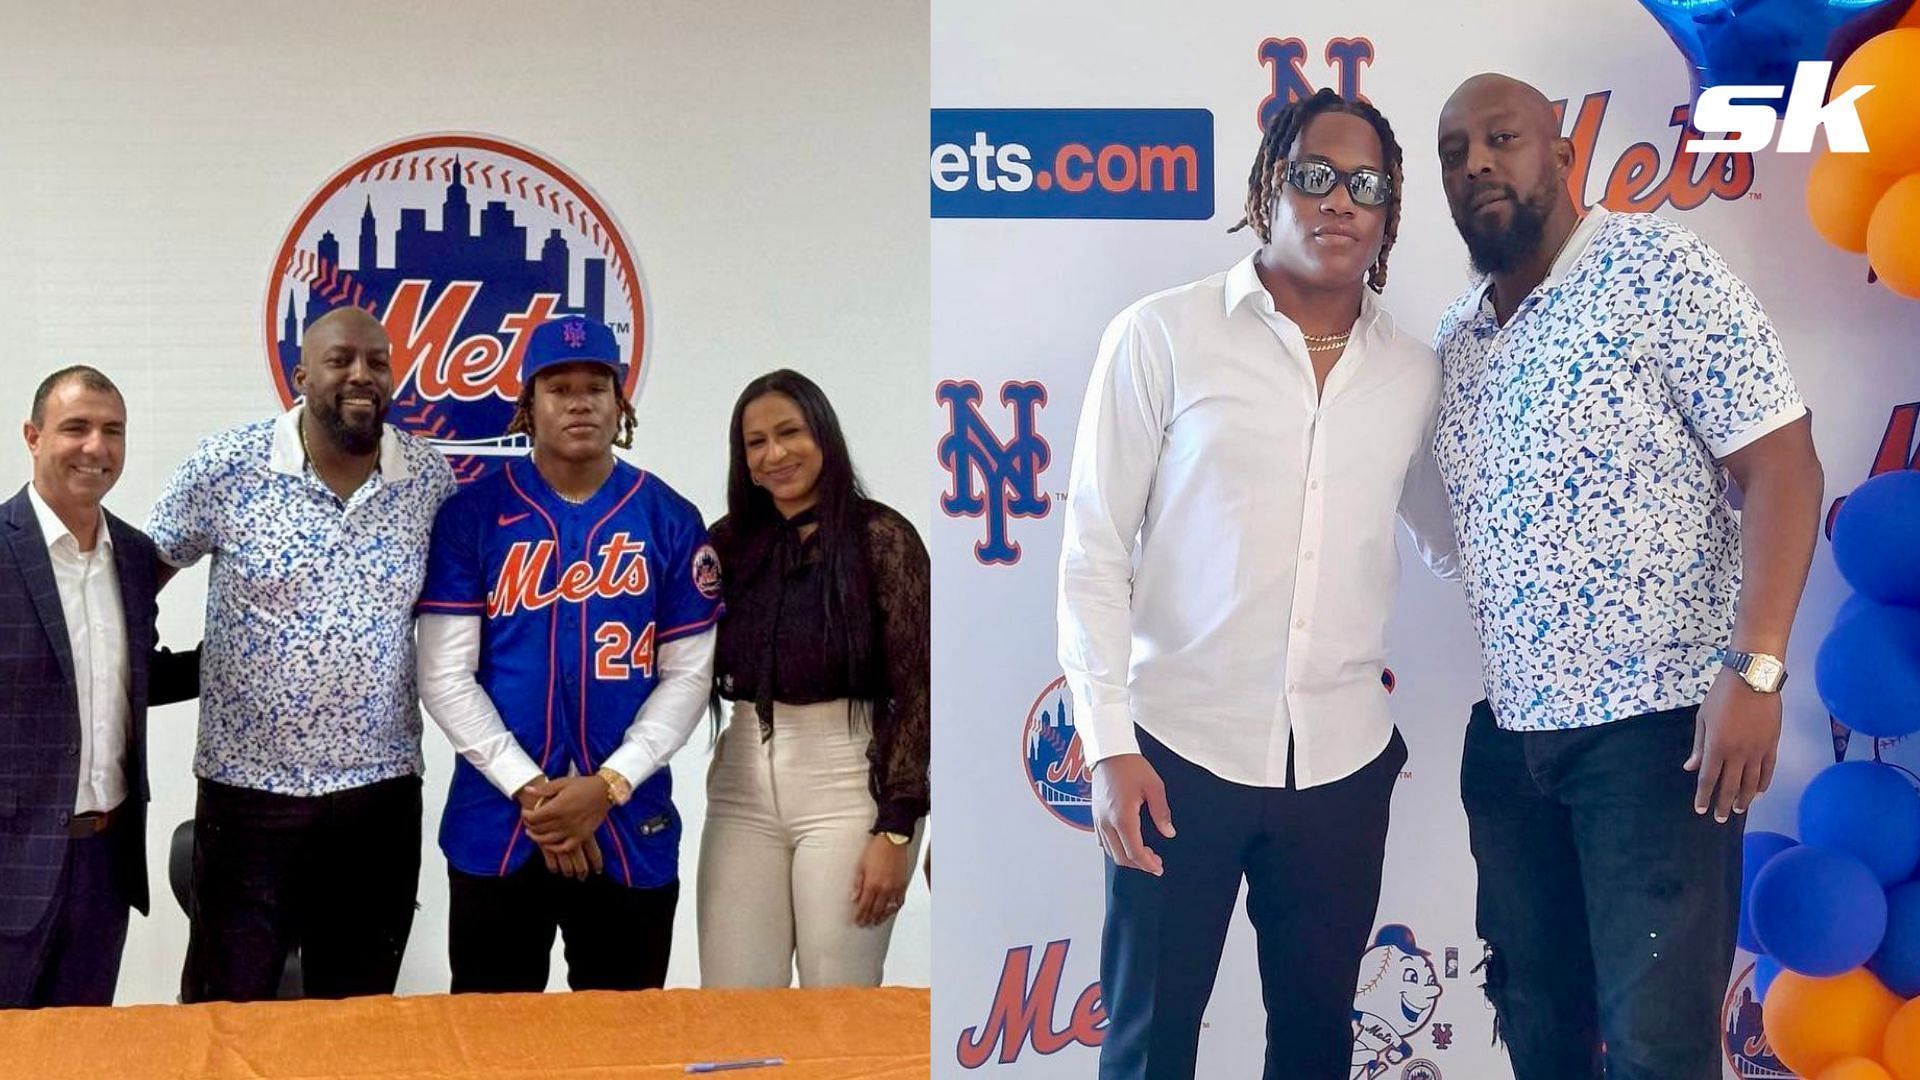 Vladimir Guerrero Sr. praises his son Vladi Miguel for signing with the New York Mets